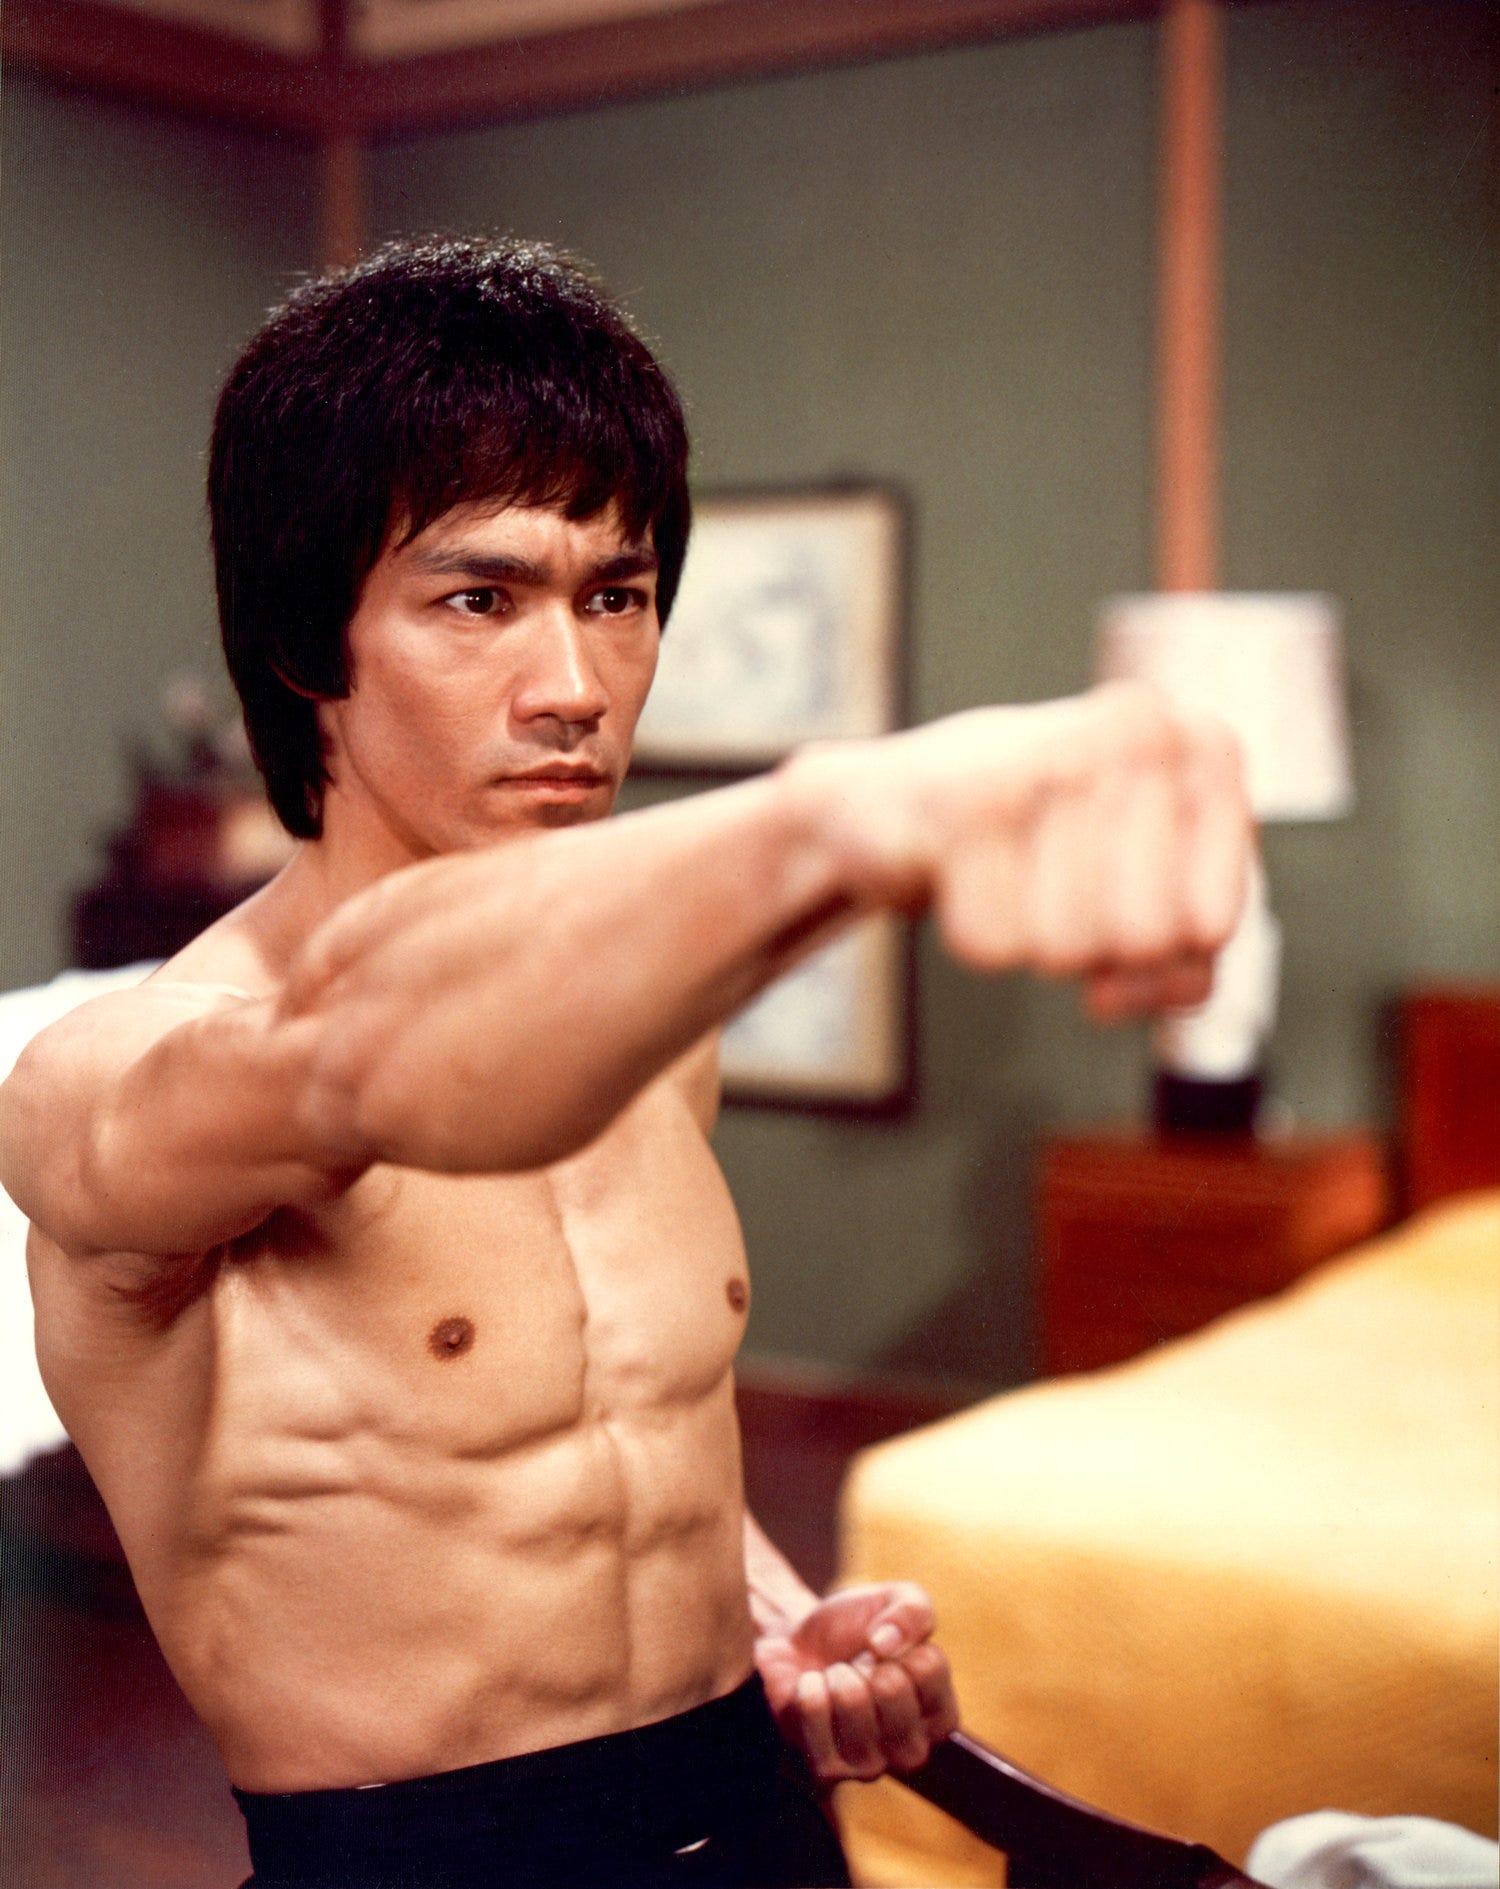 The humanity of Bruce Lee versus a whitewashed hagiography ...